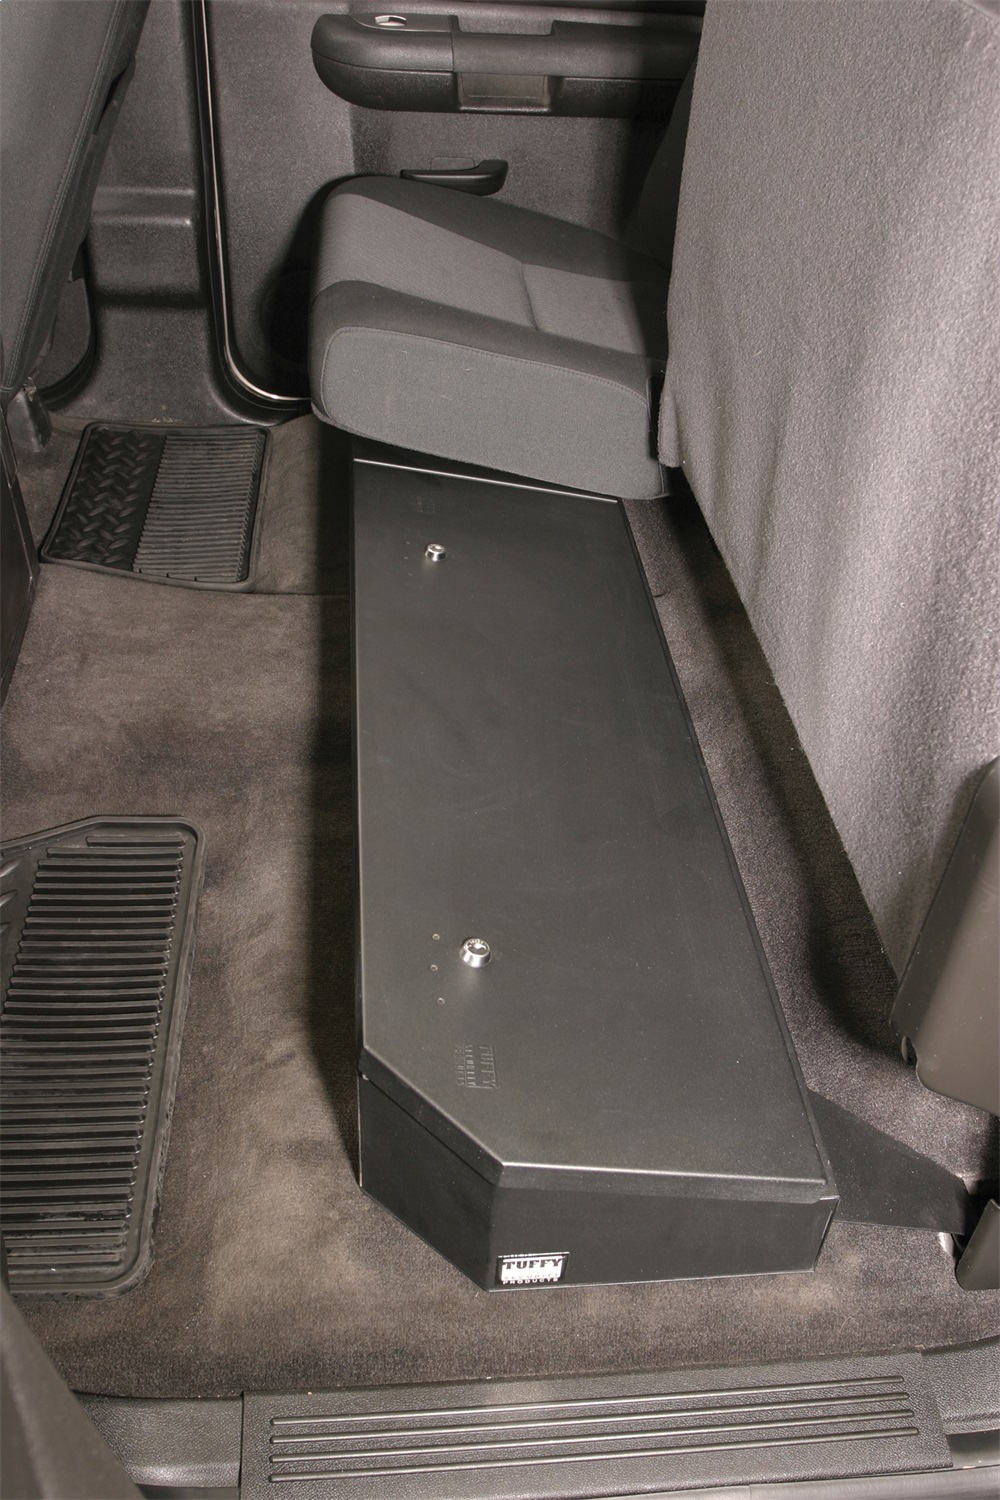 Tuffy Security Products 307-01 Compact Underseat Lockbox